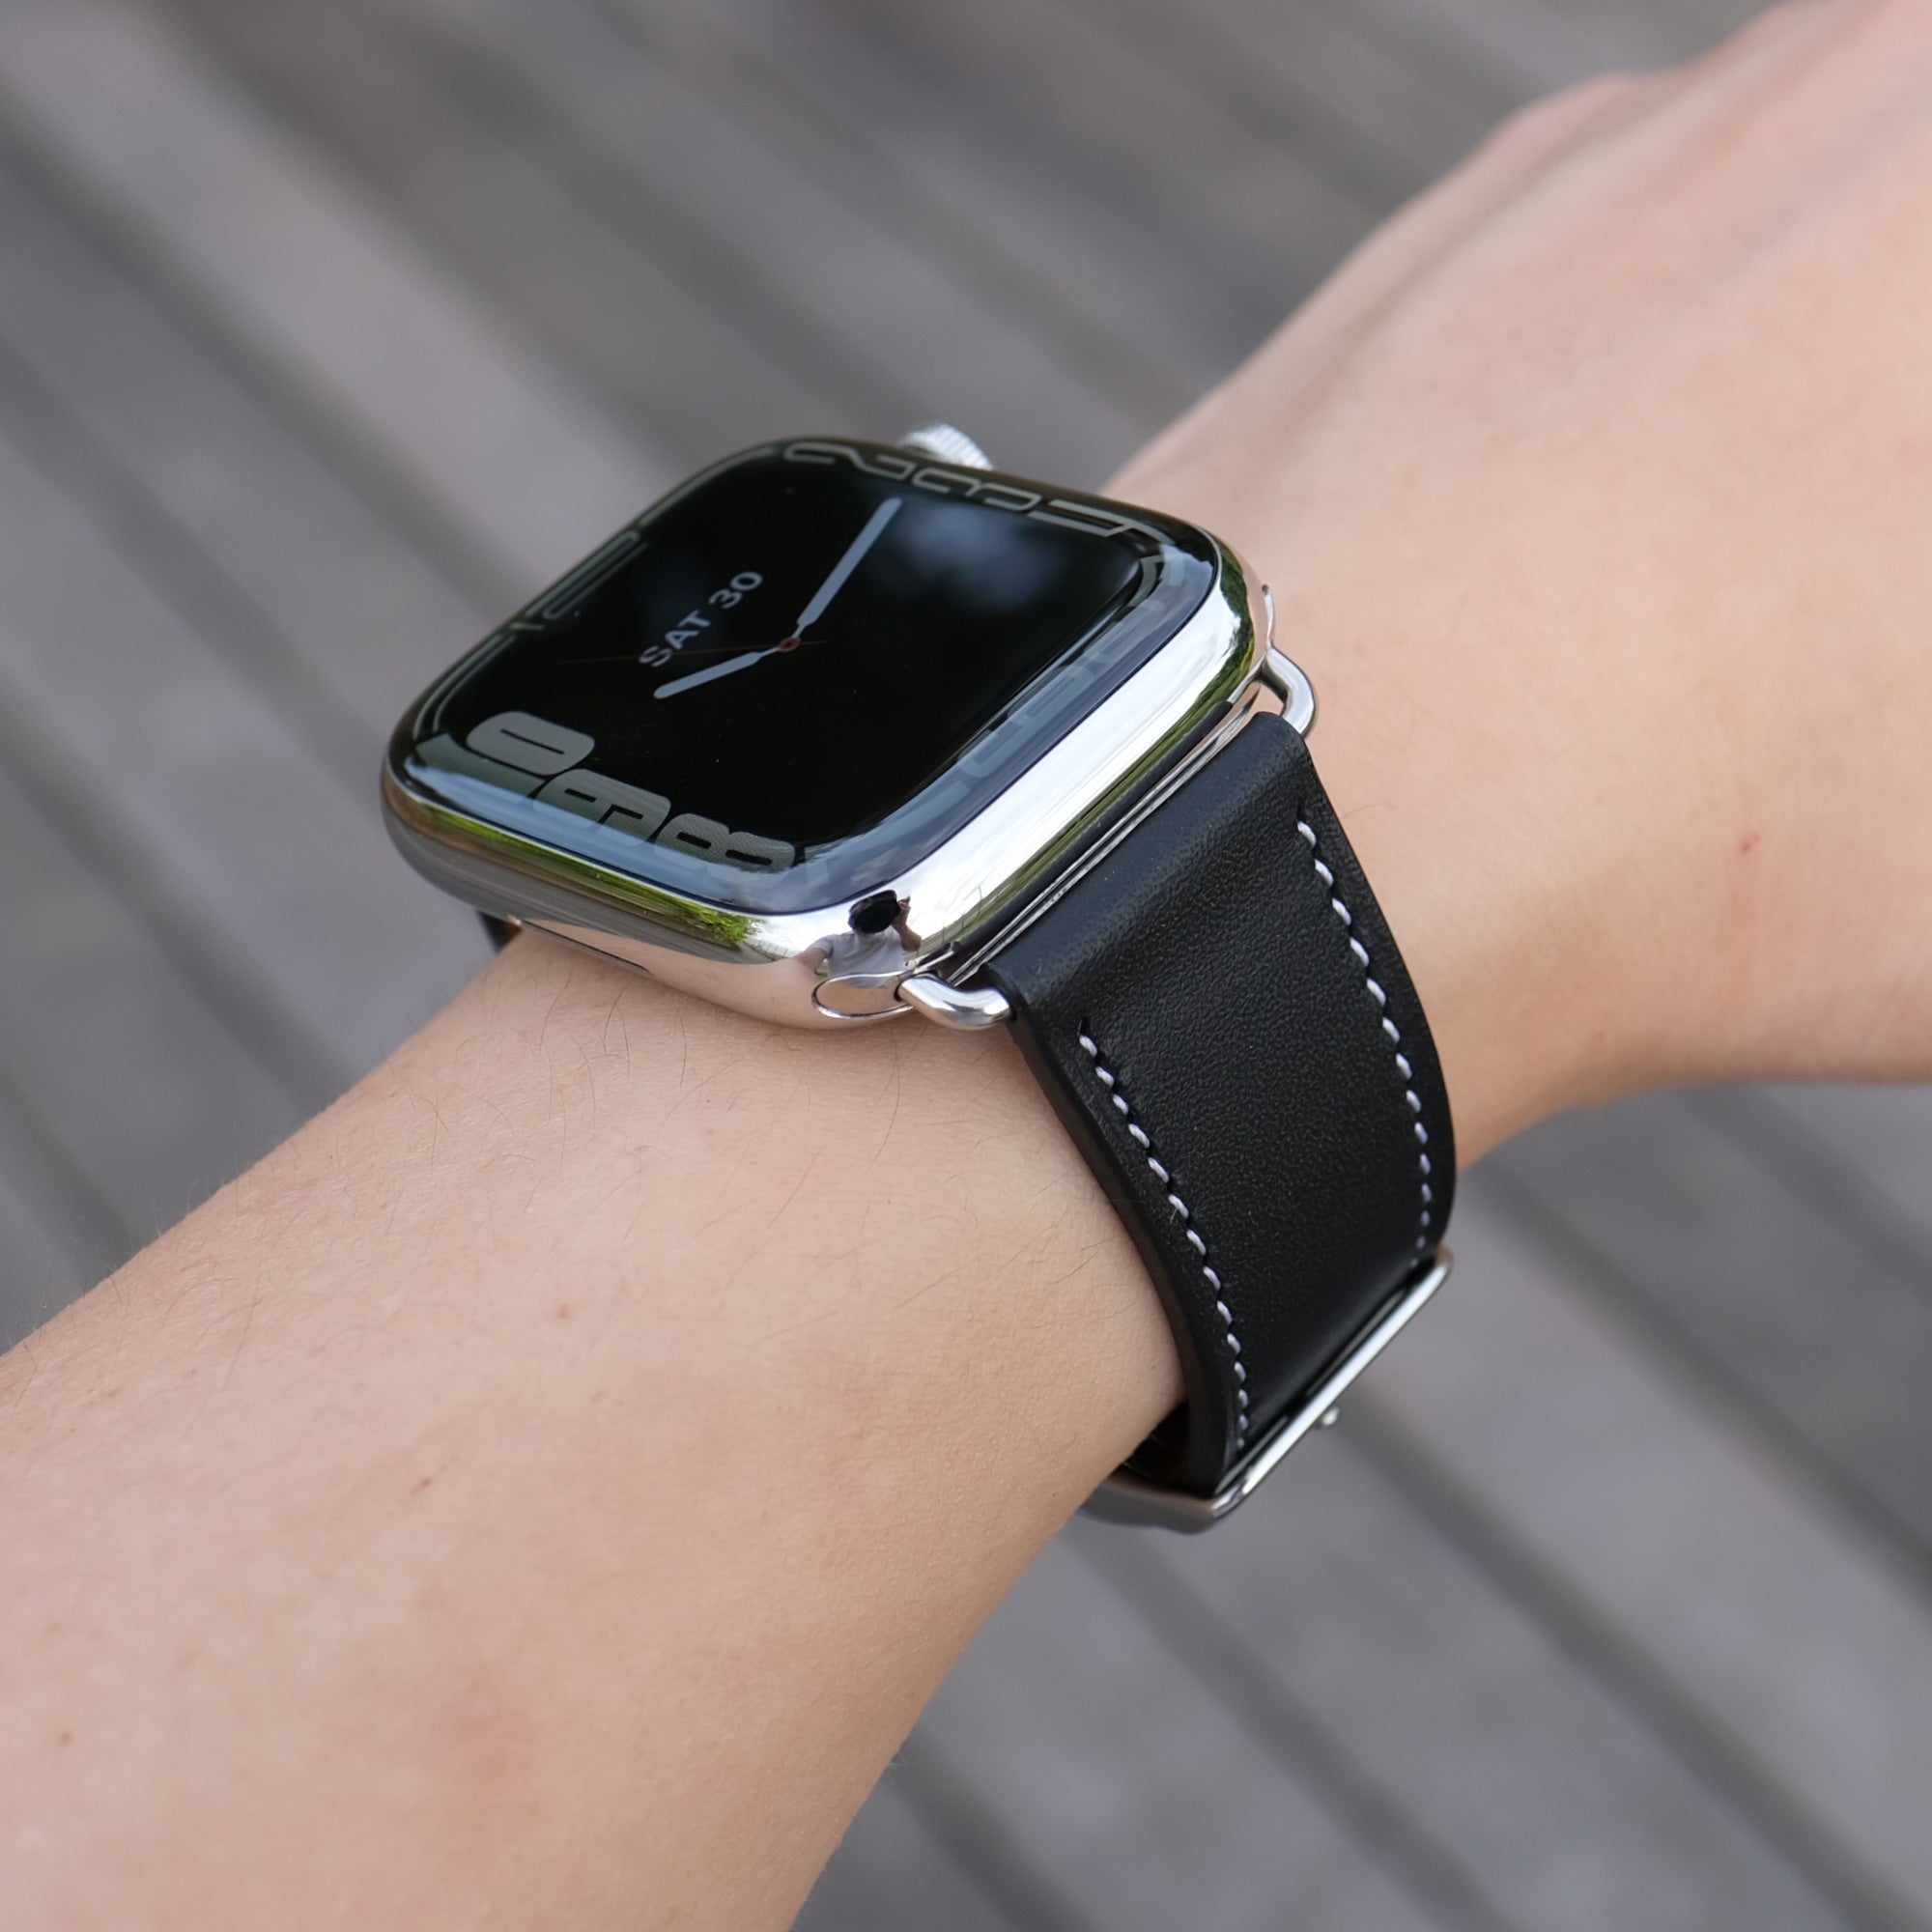 Barenia Leather Apple Watch Bands by Pin & Buckle - Black - Silver Stainless Steel Hardware - on Wrist